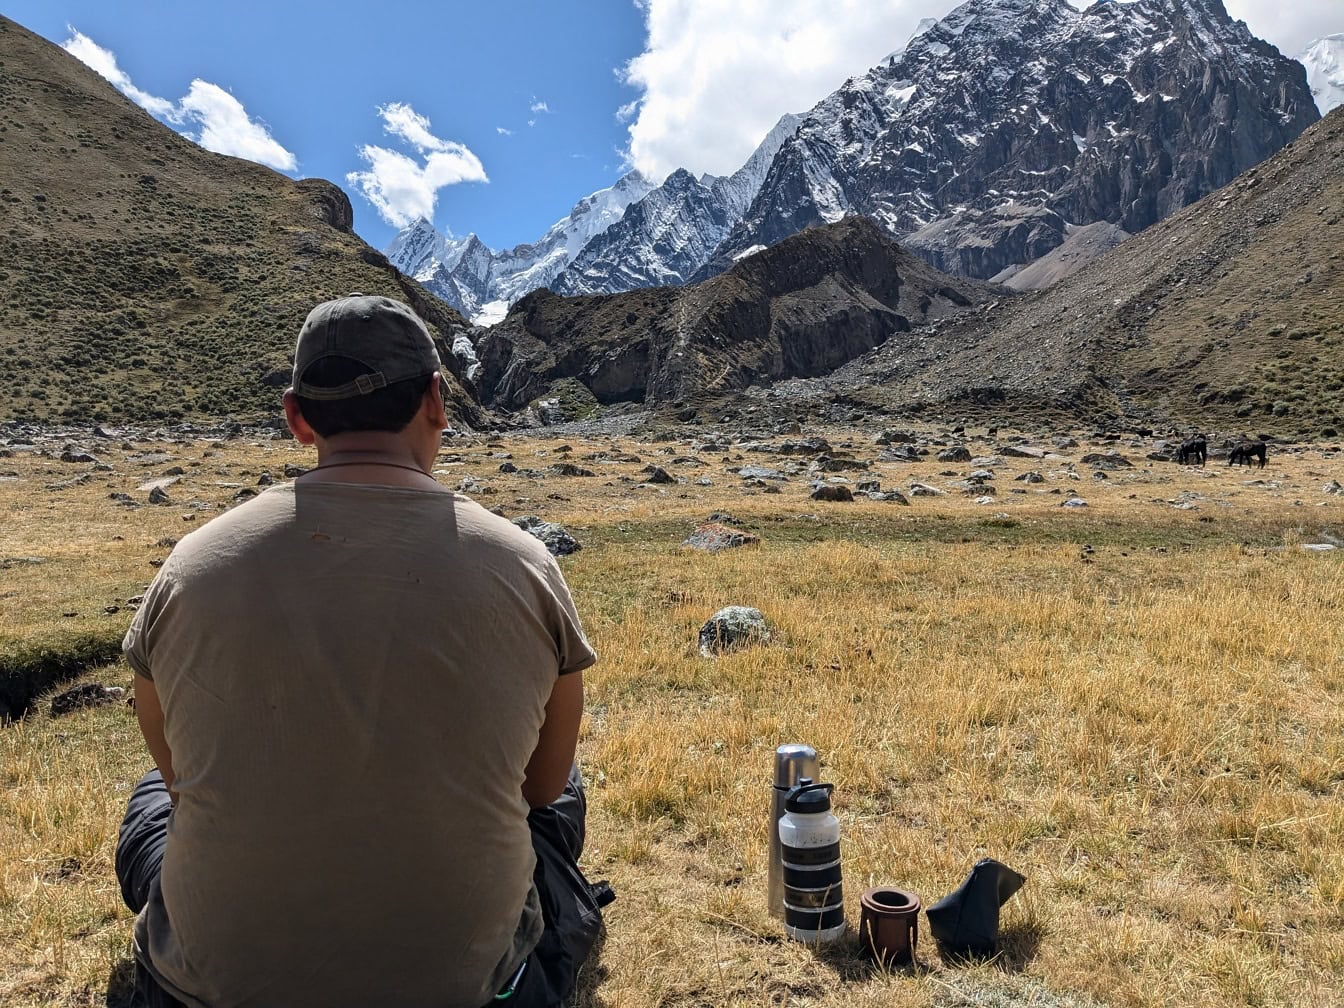 Man sitting in a field with mountains in the background at Cordillera Huayhuash mountain range in Peru